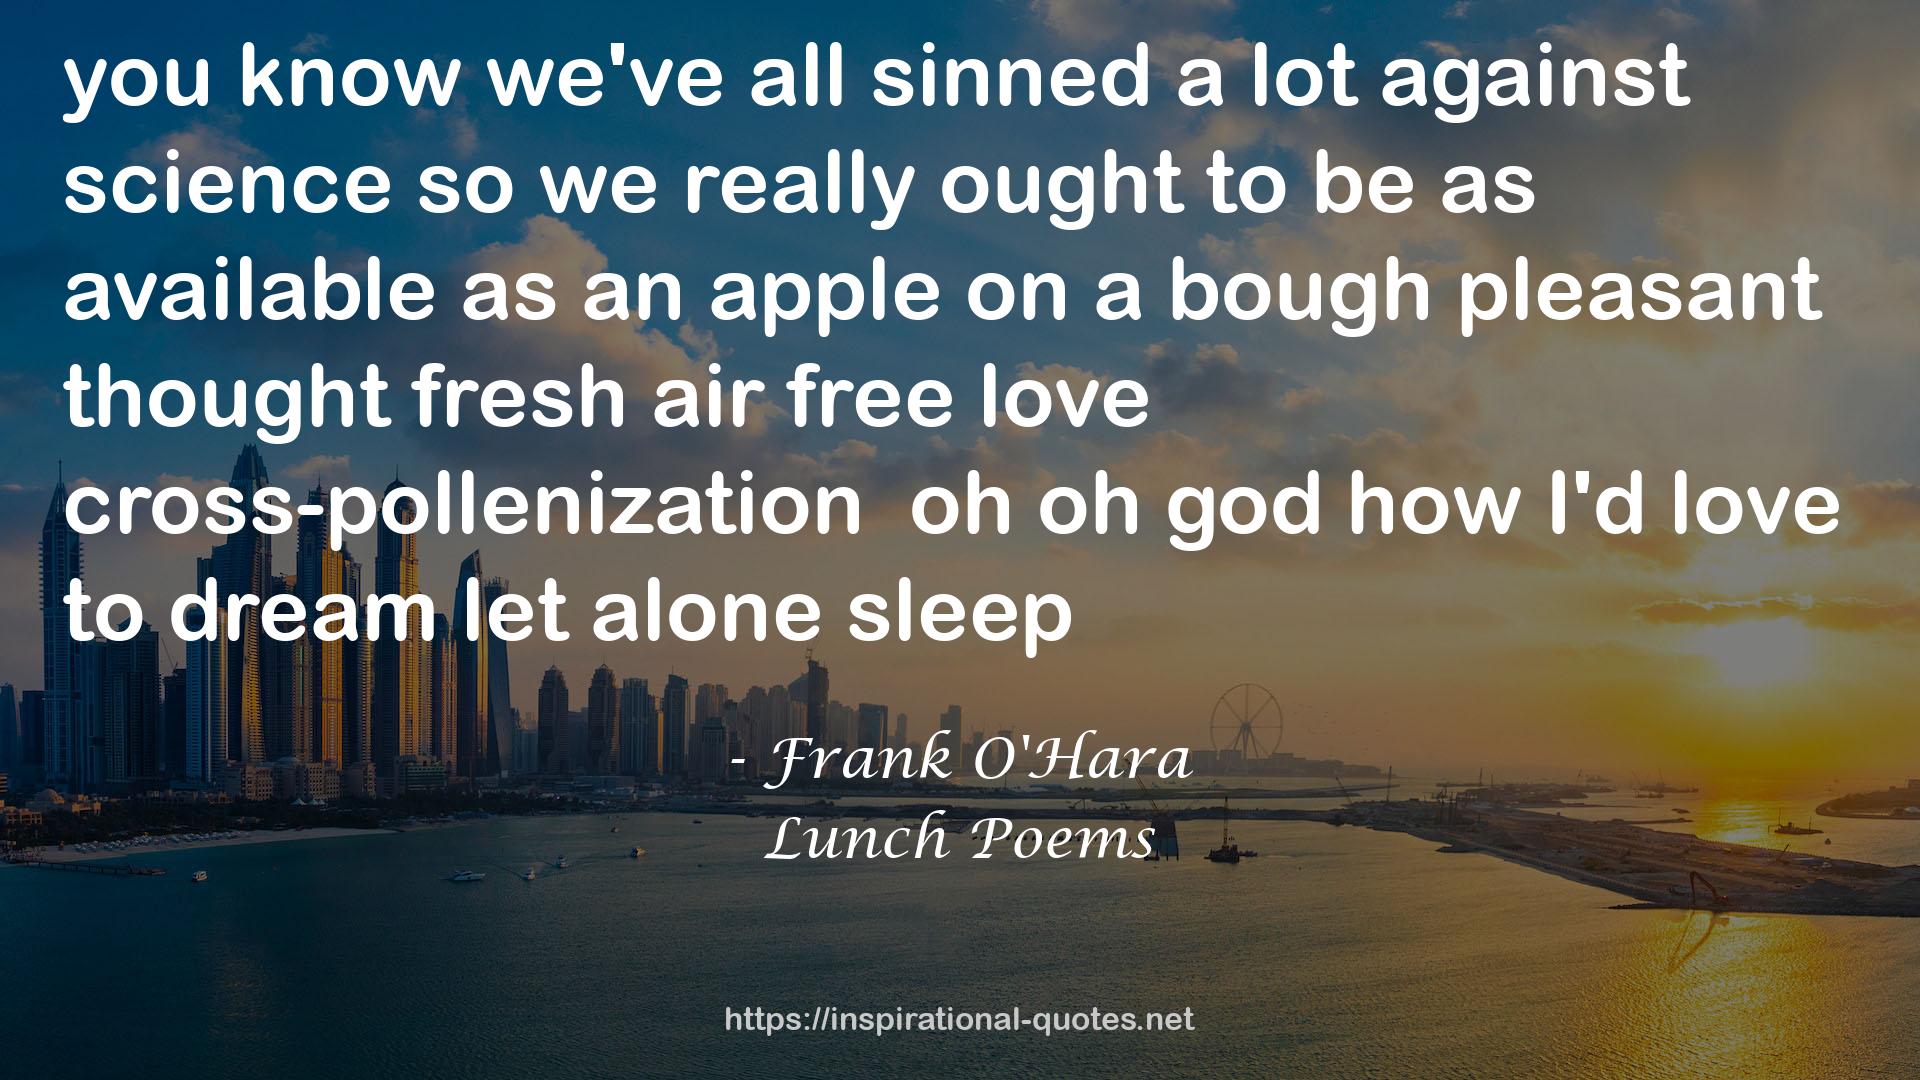 a boughpleasant thought fresh air free love cross-pollenizationoh  QUOTES